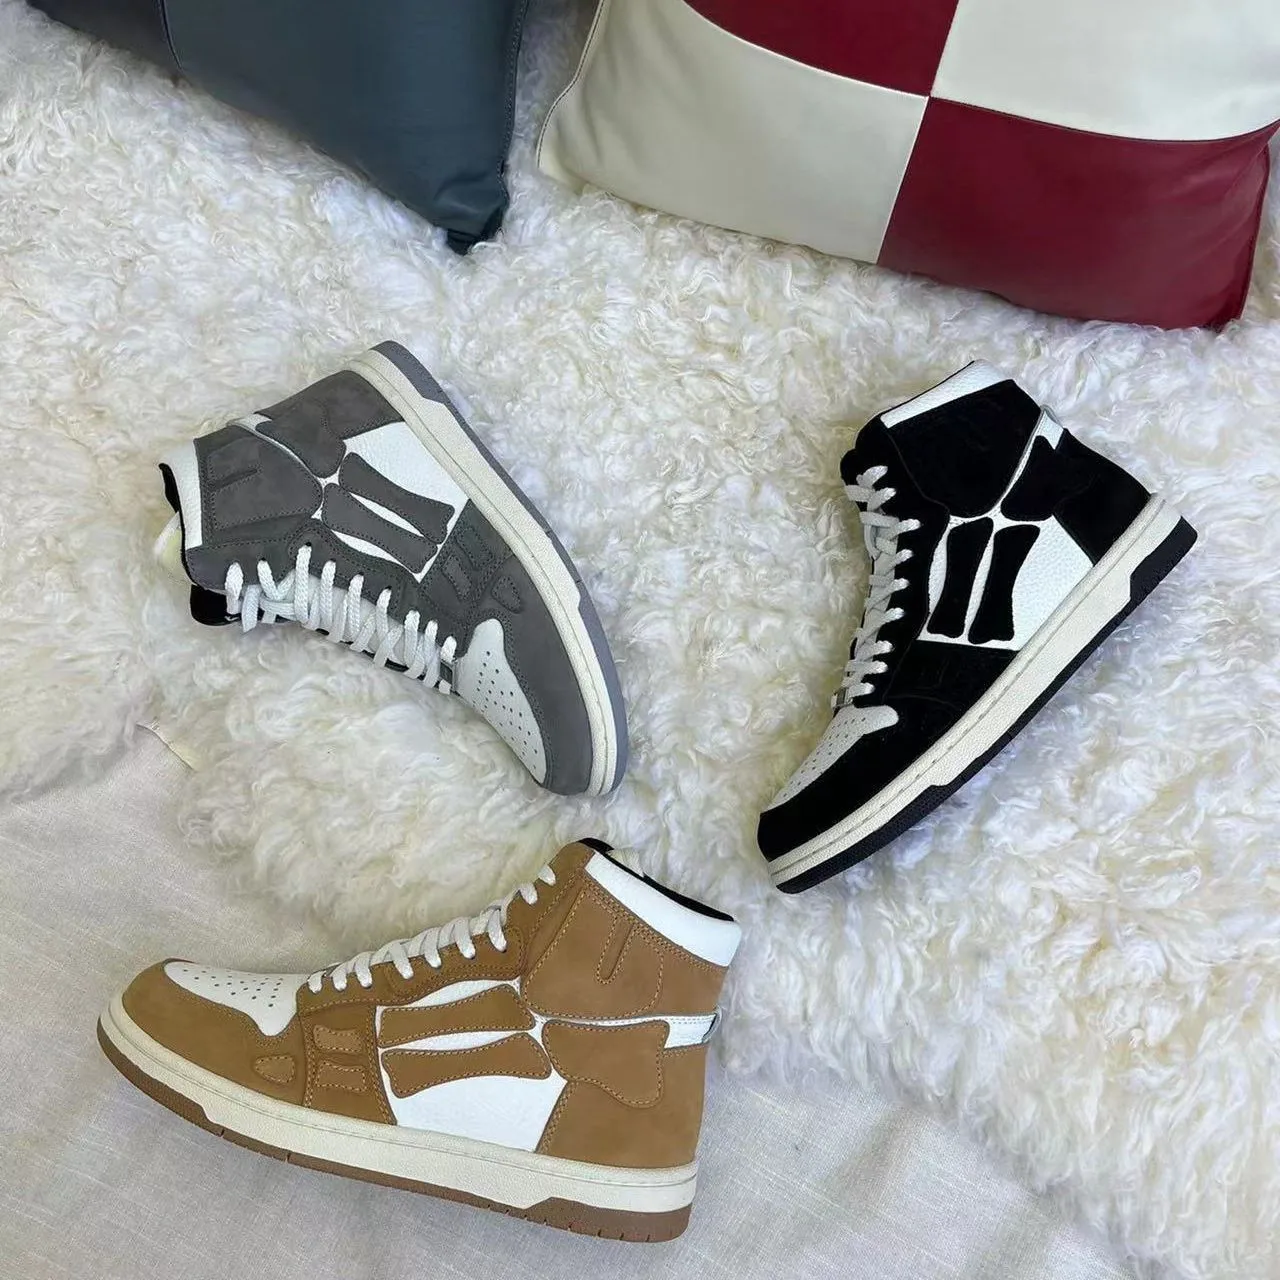 

AM Luxury Brand Men's Sneakers Cowhide Stitched Pure Bone Shoes High barrel Stitched Bone Shape Unisex Sneakers High-Top Sneaker